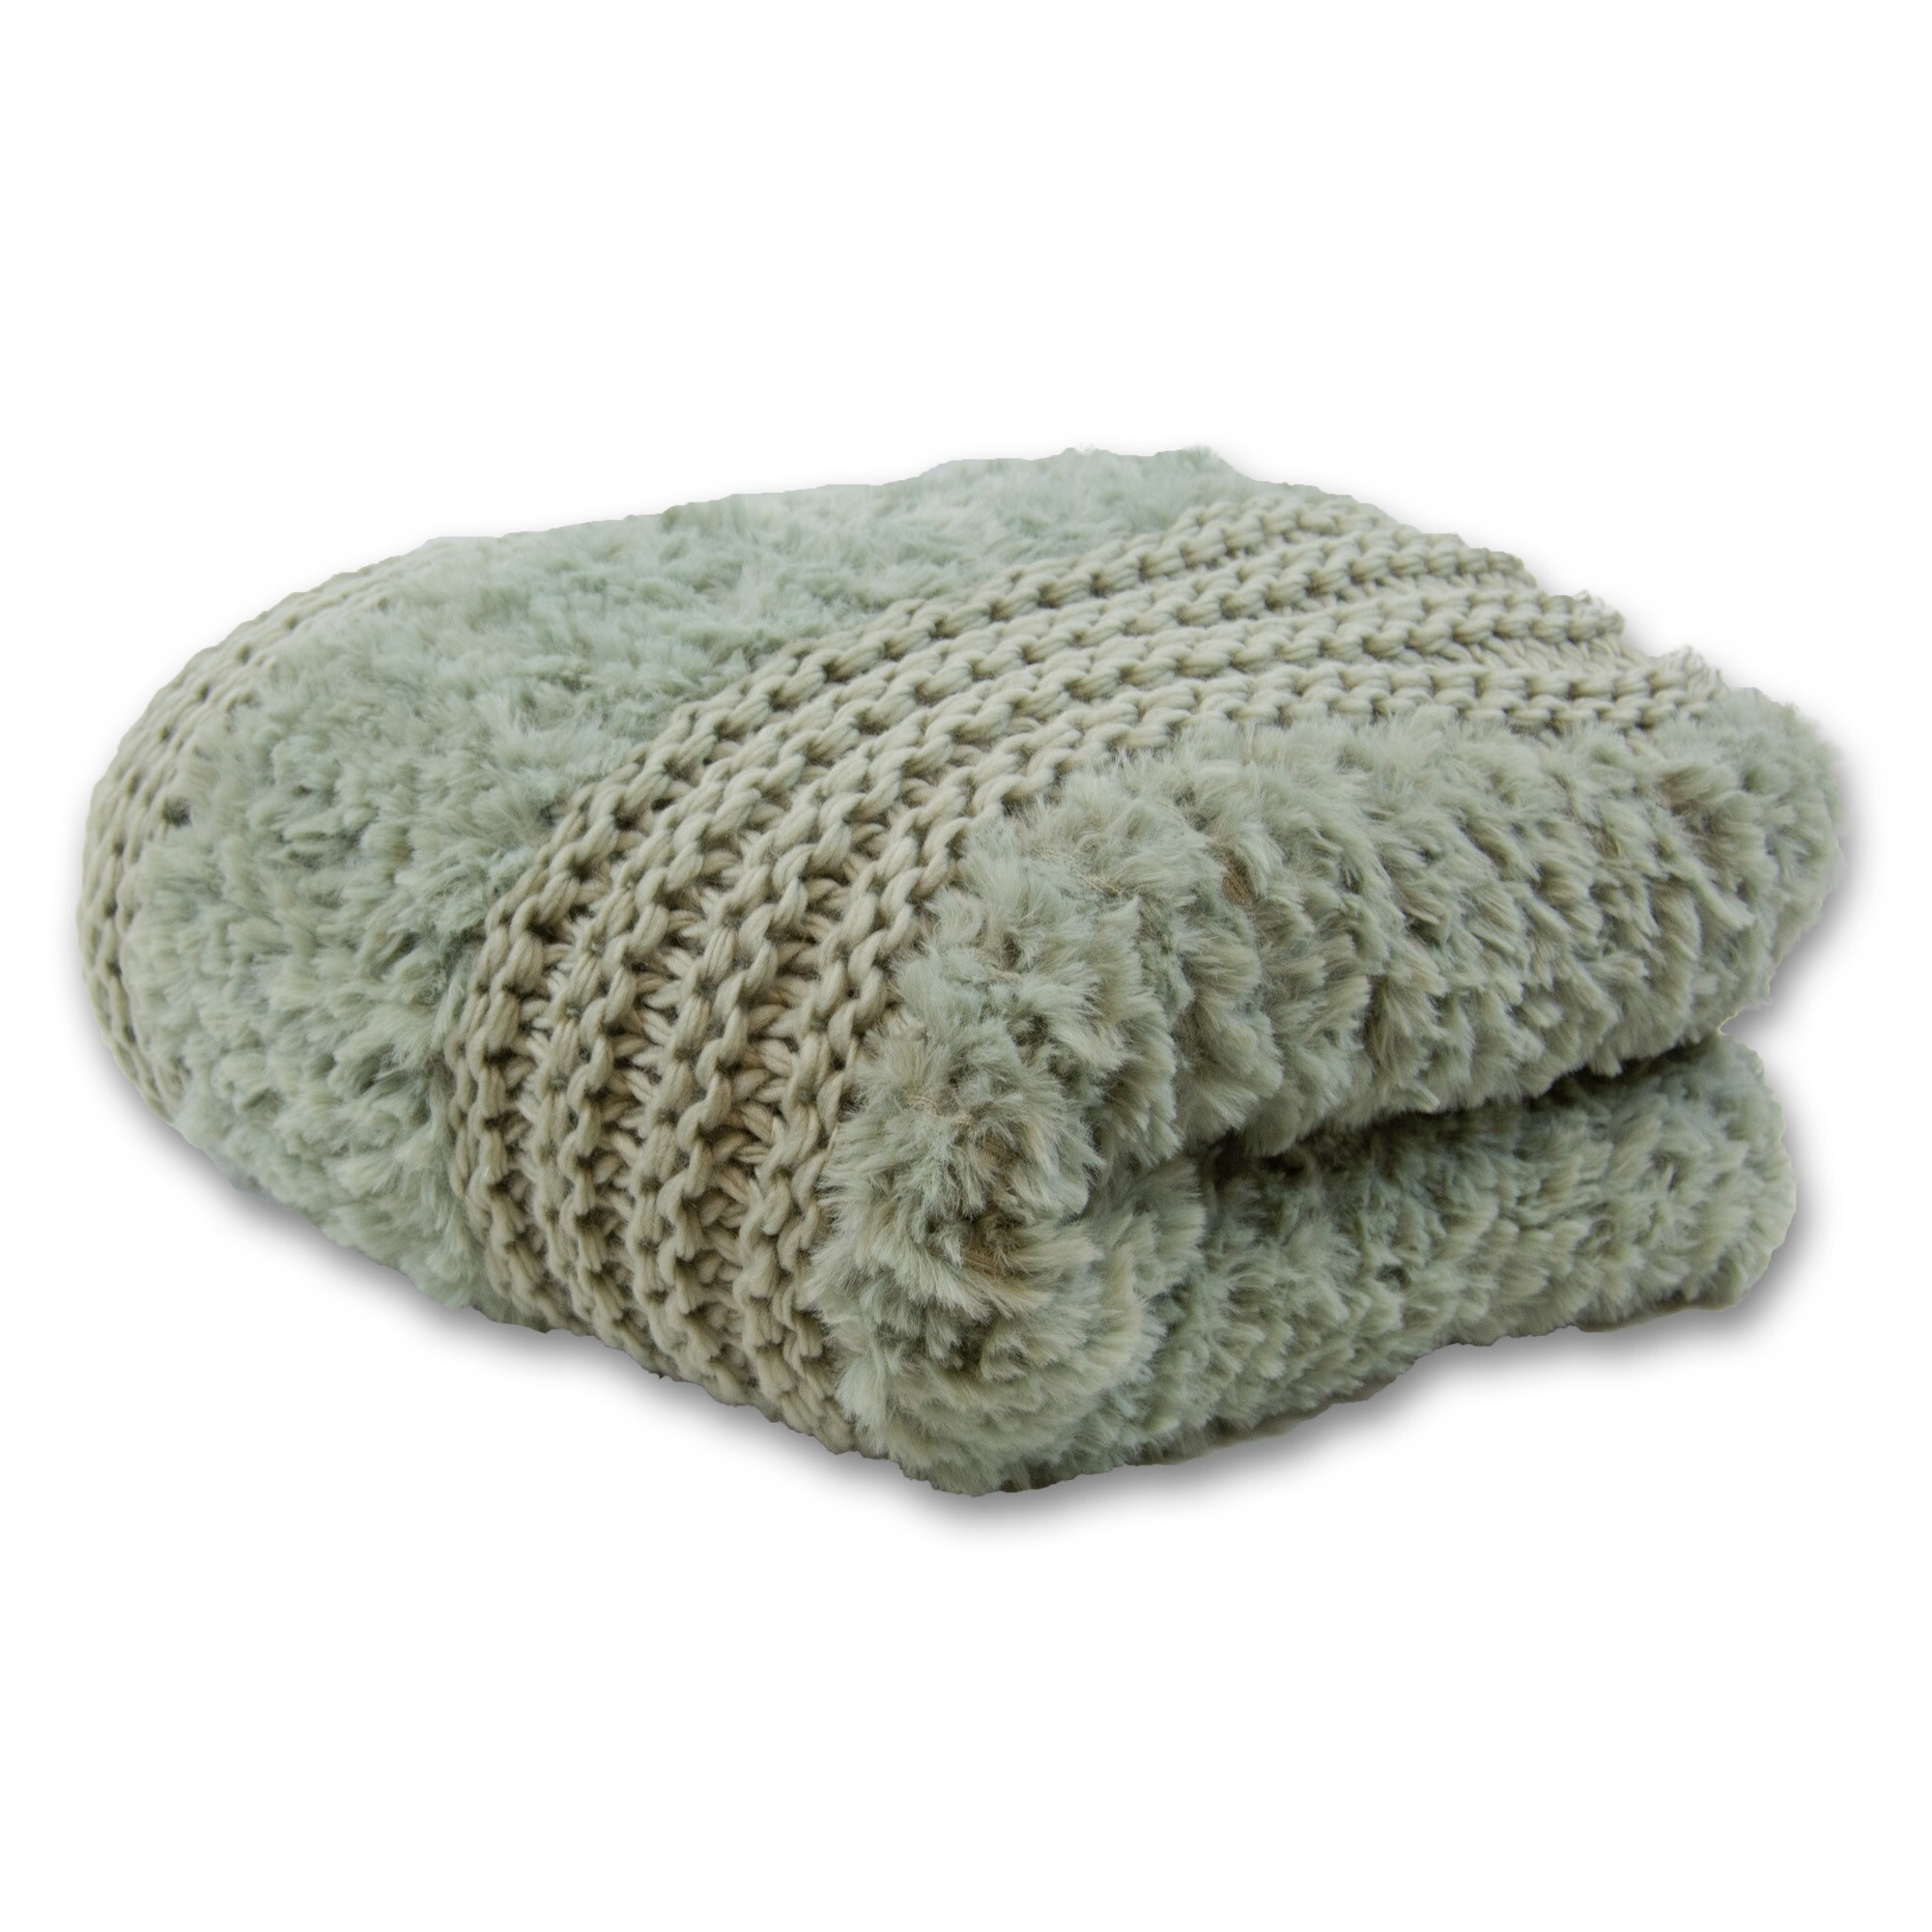 https://ak1.ostkcdn.com/images/products/is/images/direct/0bdbaa27c86987b2ce6329216dade779bdf28e12/Your-Lifestyle-by-Donna-Sharp-Plush-Knit-Throw.jpg